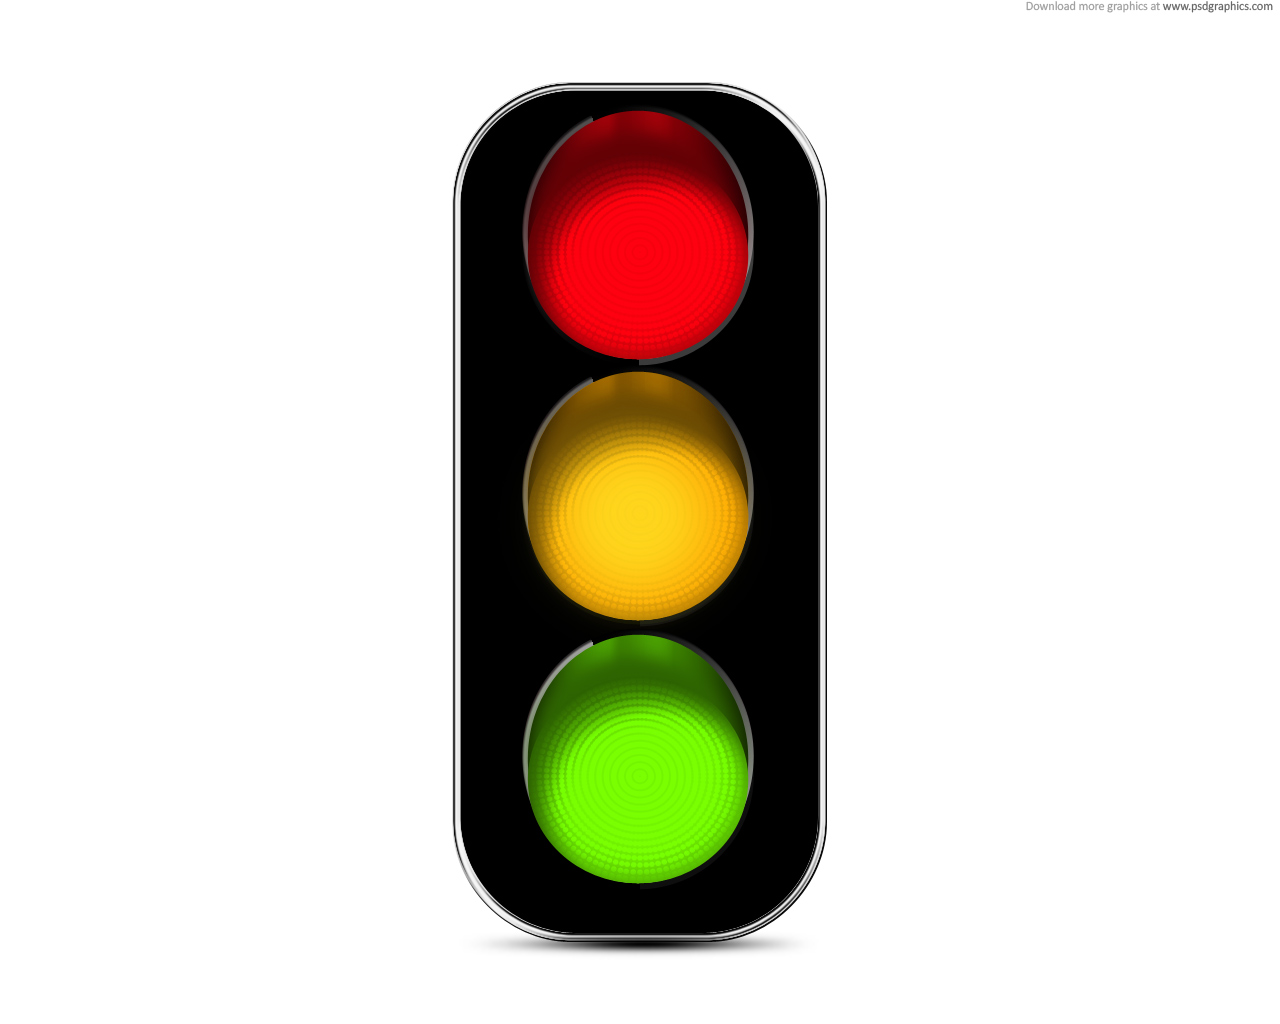 Green Stoplight - Clipart library | Clipart library - Free Clipart Images